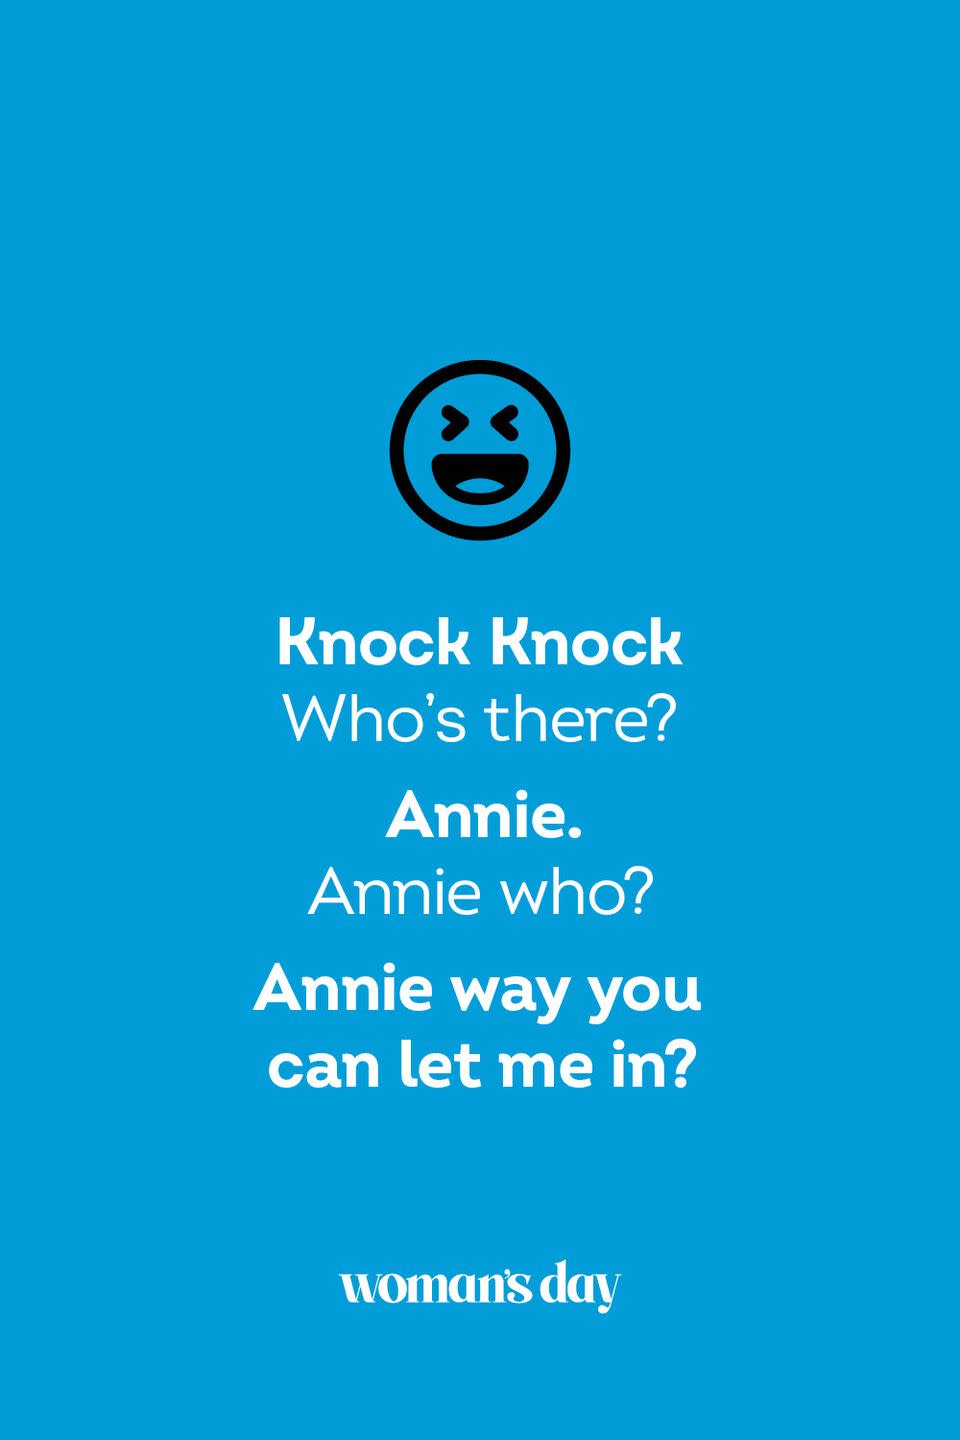 <p><strong>Knock Knock</strong></p><p><em>Who’s there? </em></p><p><strong>Annie.</strong></p><p><em>Annie who? </em></p><p><strong>Annie way you can let me in?</strong></p>